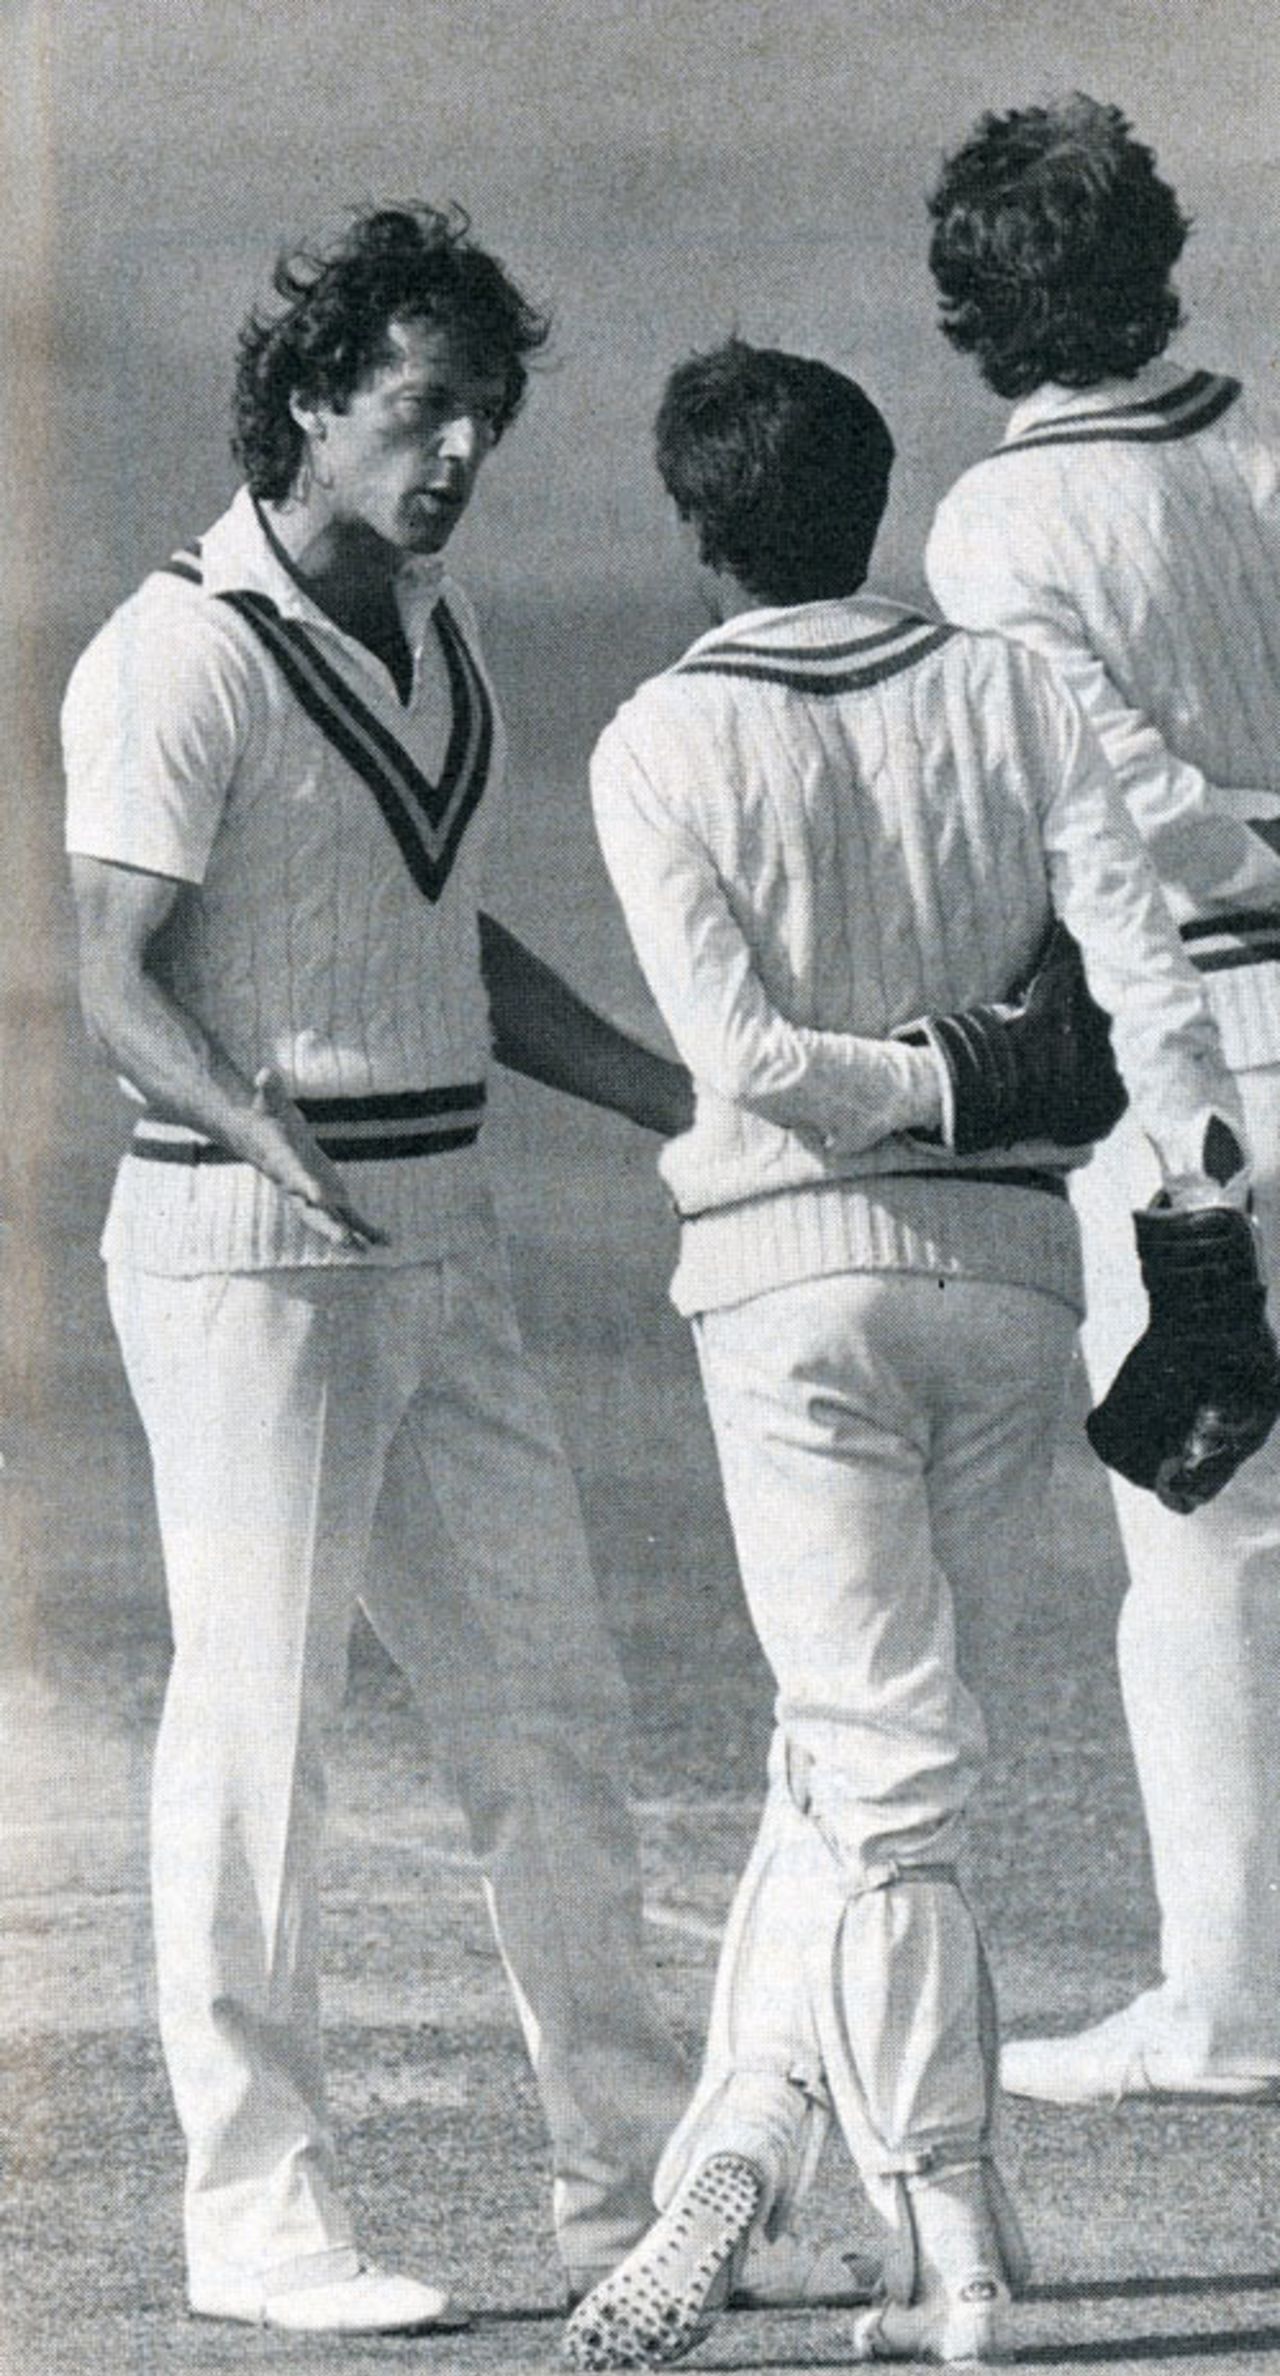 Imran Khan remonstrates with Saleem Yousuf after Yousuf had tried to claim he caught Ian Botham when he had clearly dropped the ball and picked it up off the turf, England v Pakistan, 3rd Test, Headingley, July 2, 1987